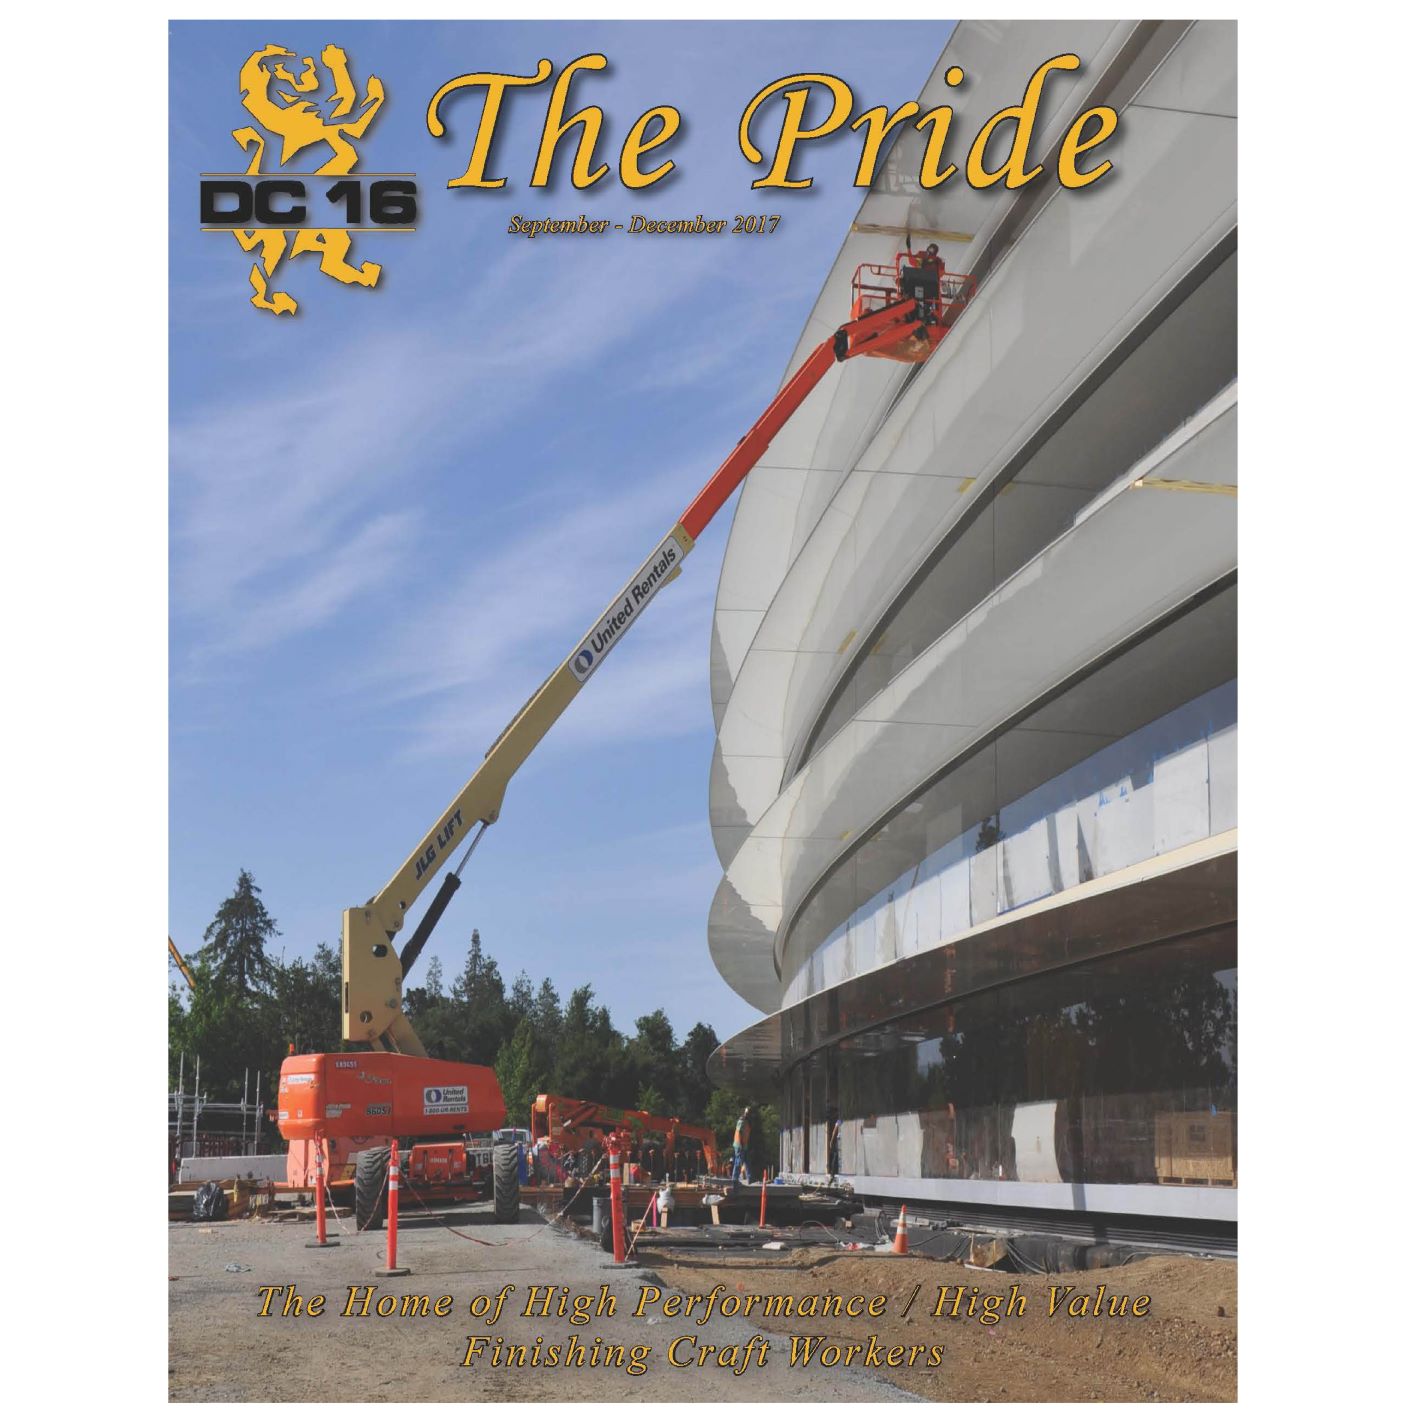 Image from the Gallery: THE PRIDE SEPTEMBER – DECEMBER 2017